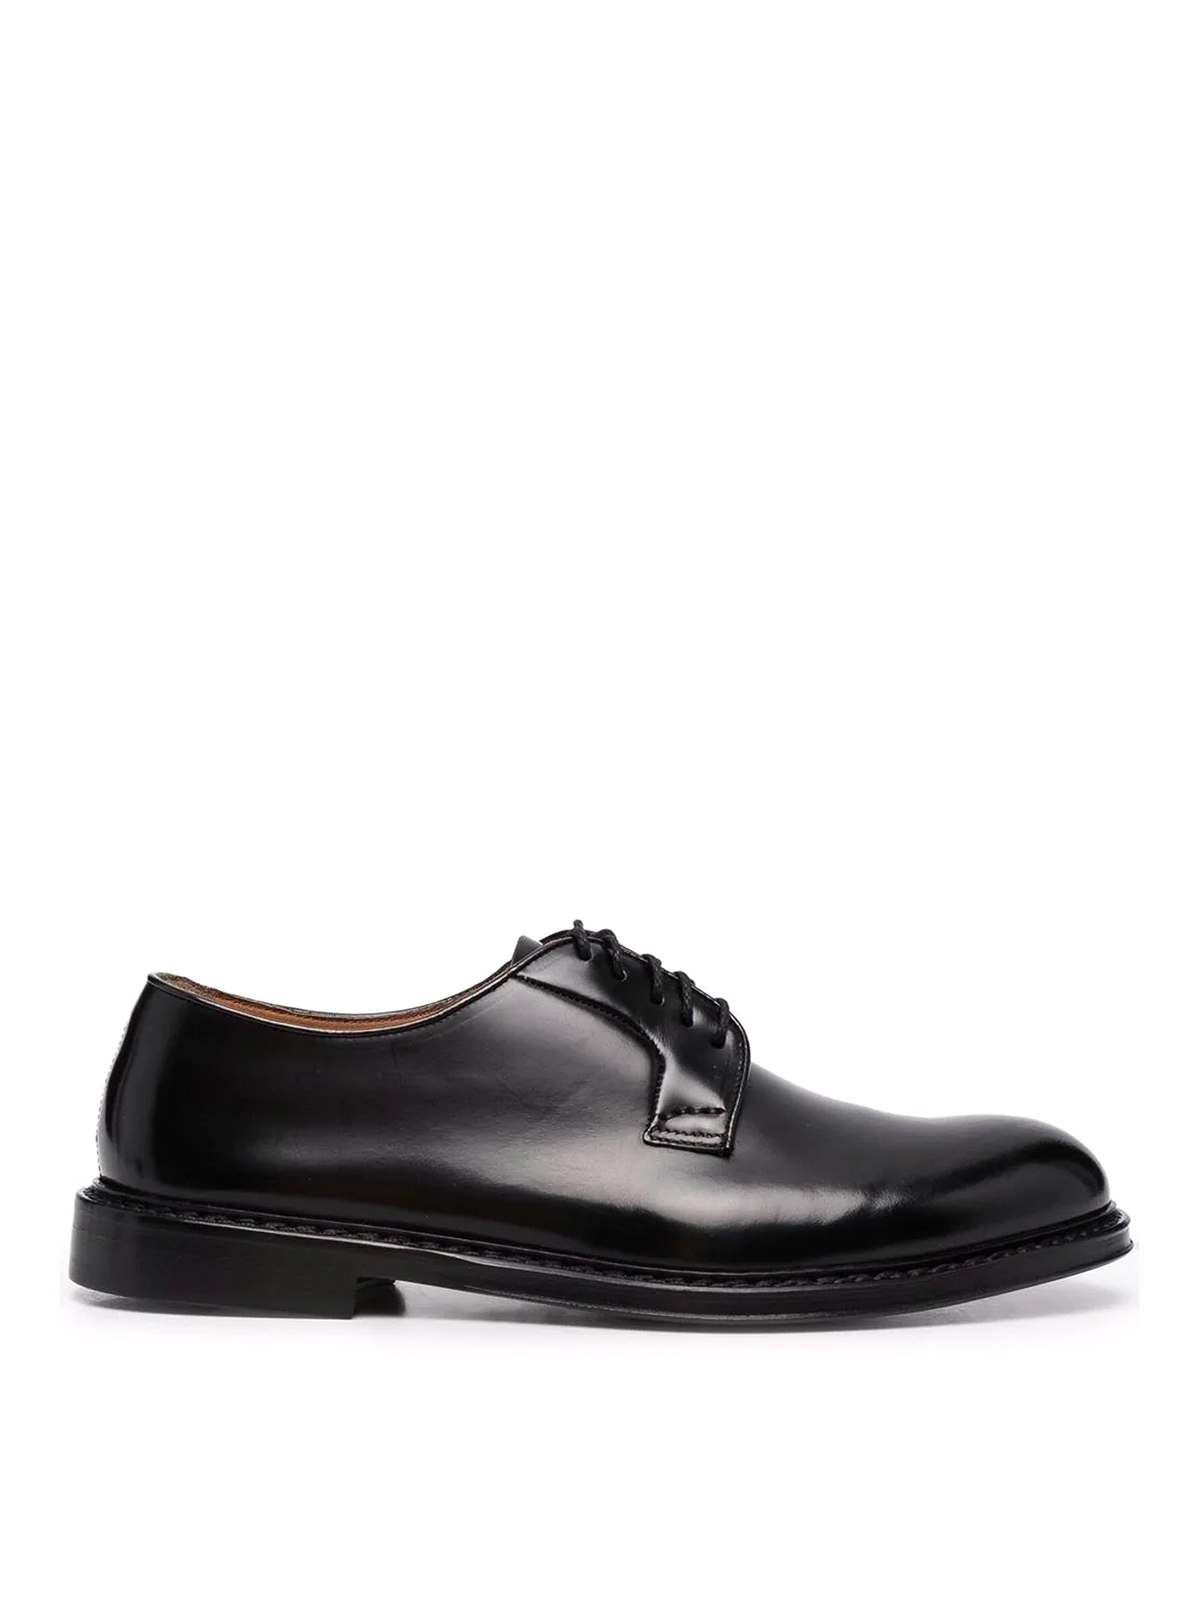 DOUCAL'S DERBY SHOES